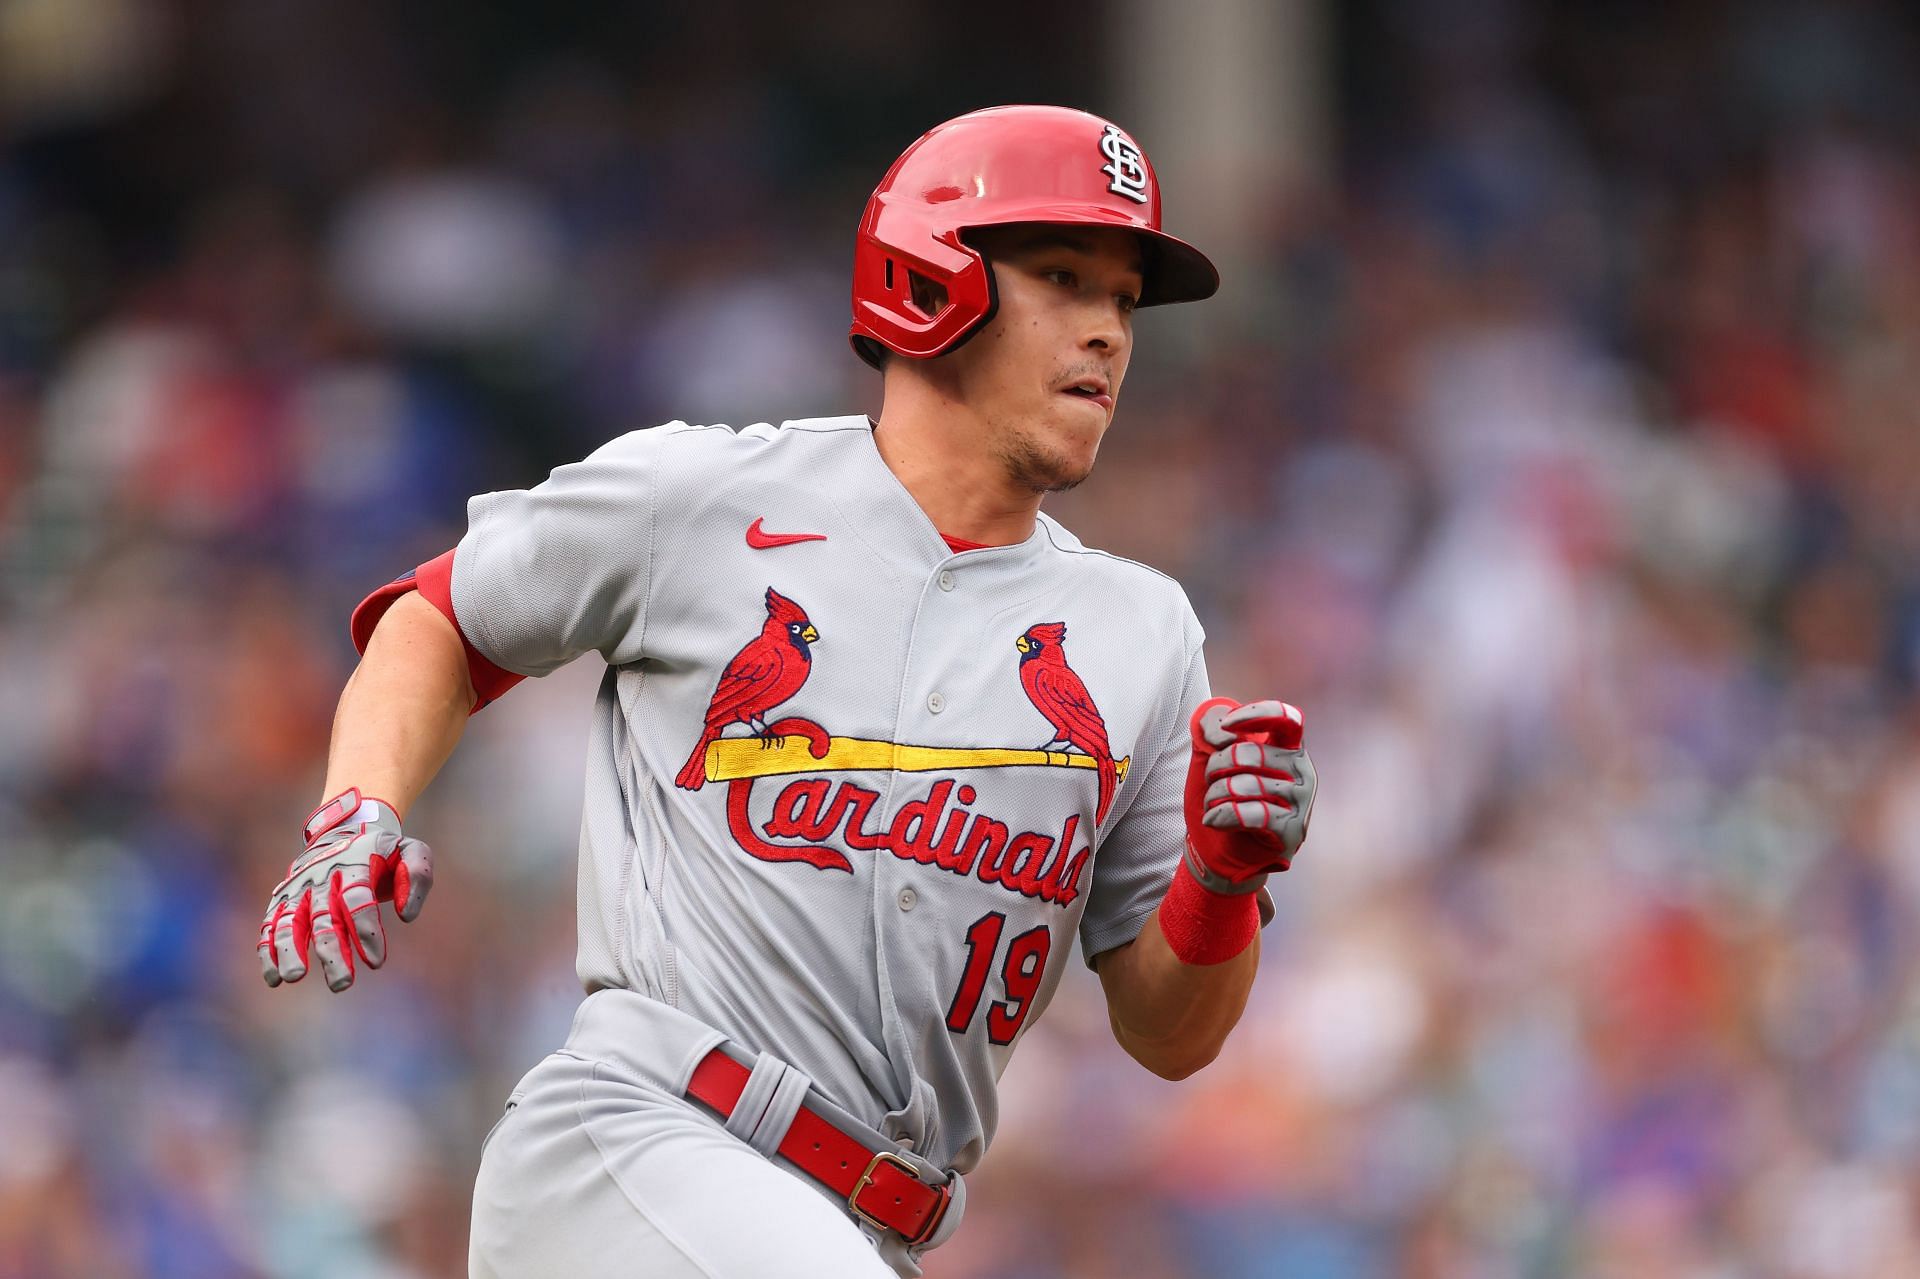 Cardinals' Tommy Edman to play for Team Korea in World Baseball